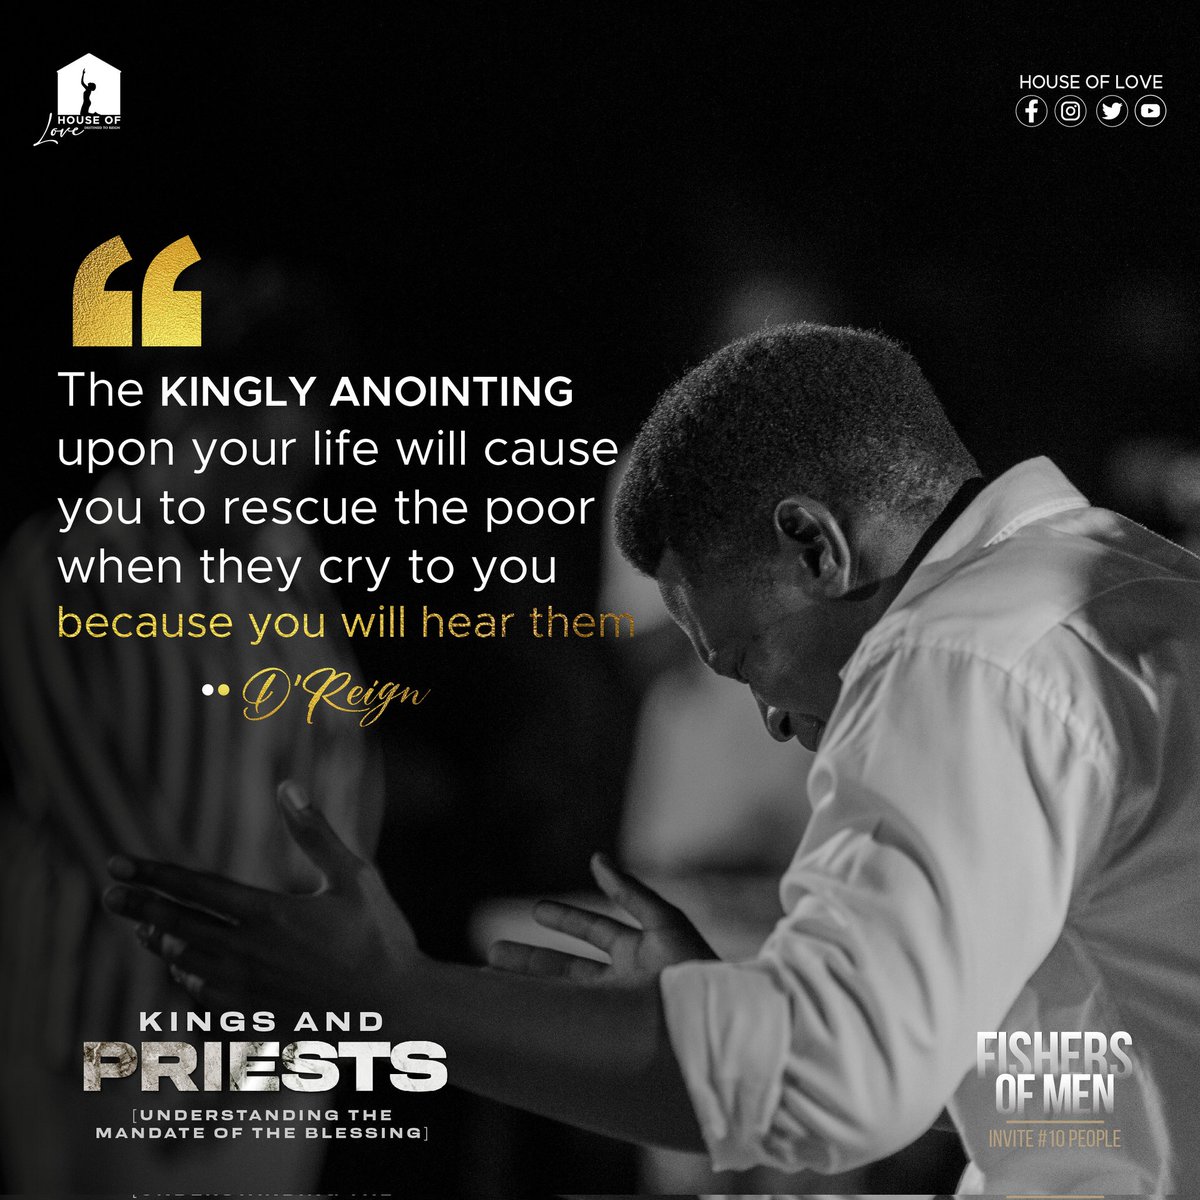 Psalms 72:4 - He will bring justice to the poor of the people; He will save the children of the needy, And will break in pieces the oppressor.

That is the mandate of Kingship👑

#houseofloveug 
#KingsandPriests